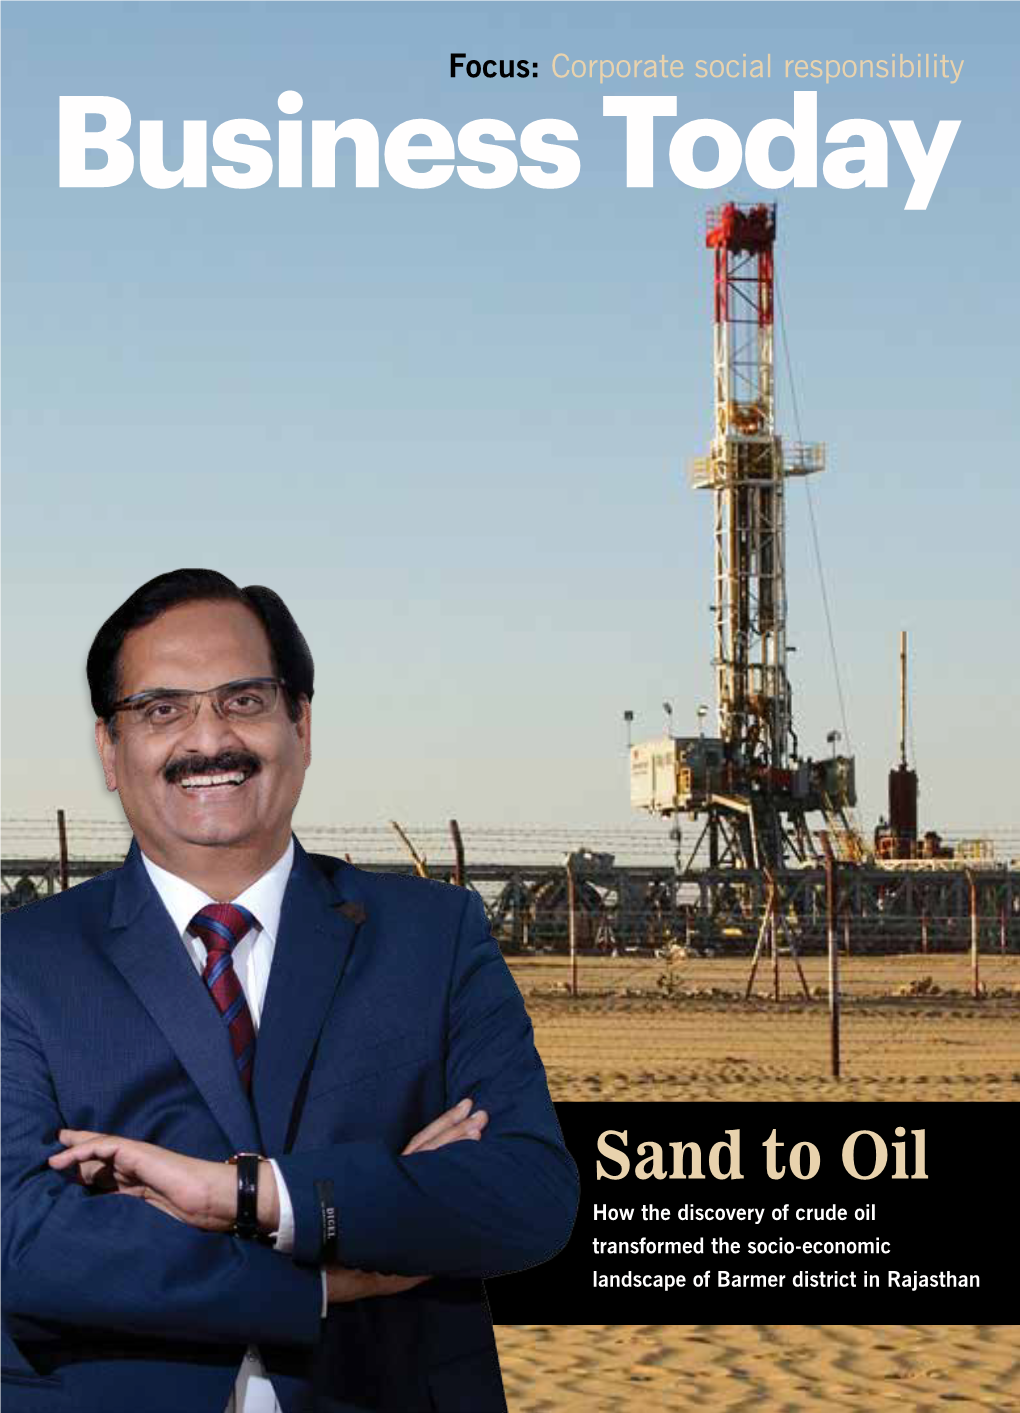 Sand to Oil How the Discovery of Crude Oil Transformed the Socio-Economic Landscape of Barmer District in Rajasthan